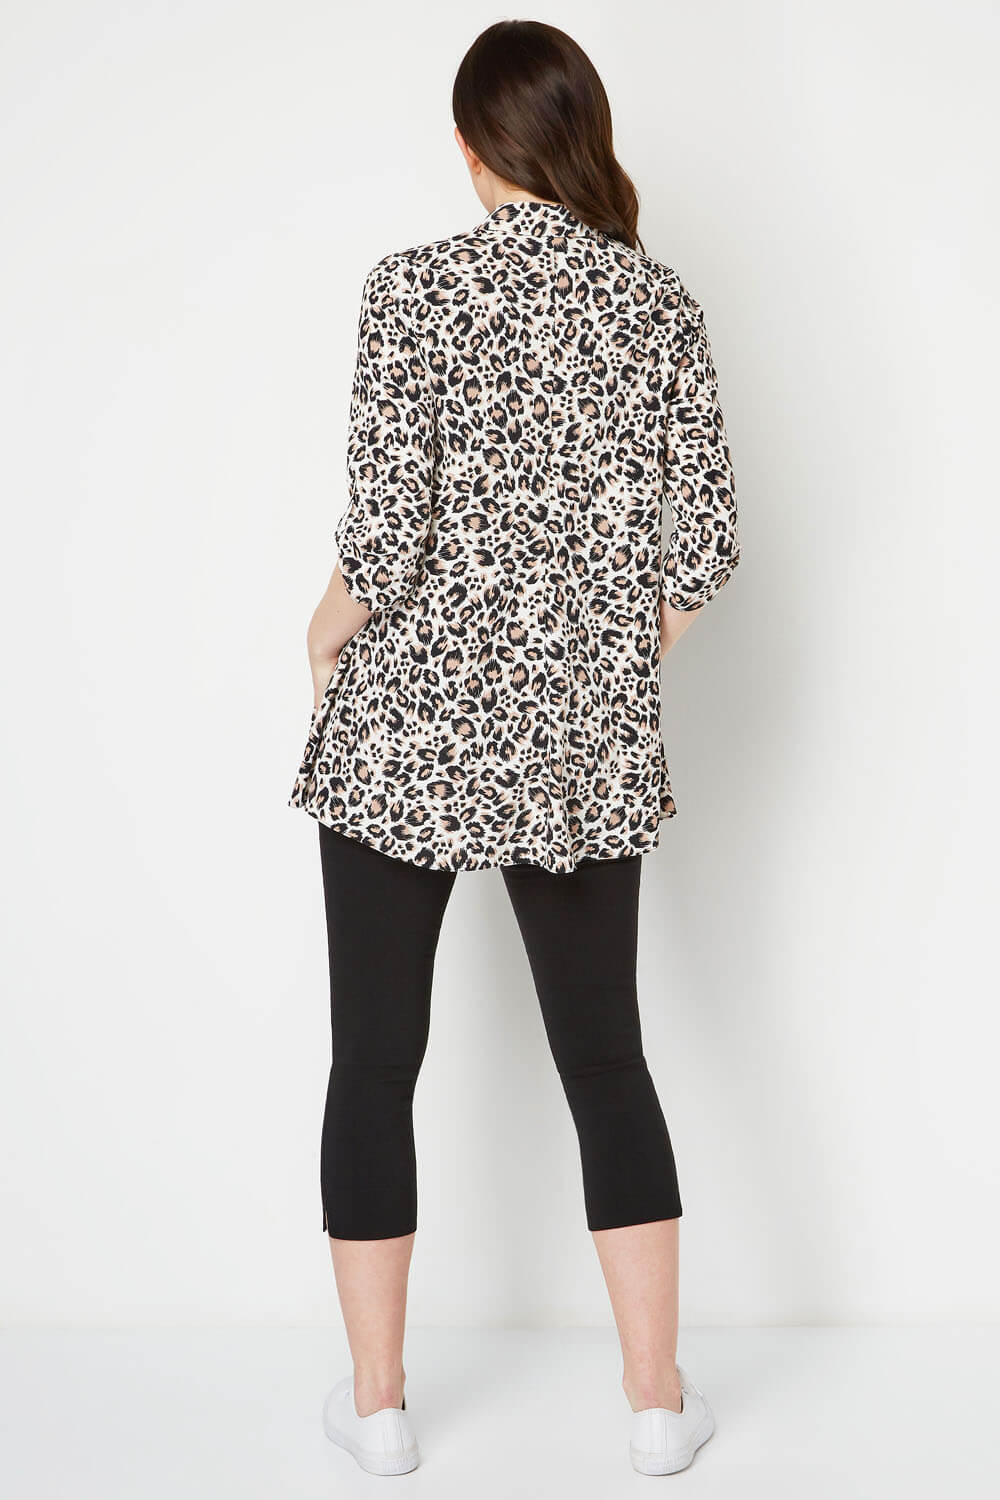 Brown Leopard Print Tunic Blouse, Image 3 of 8